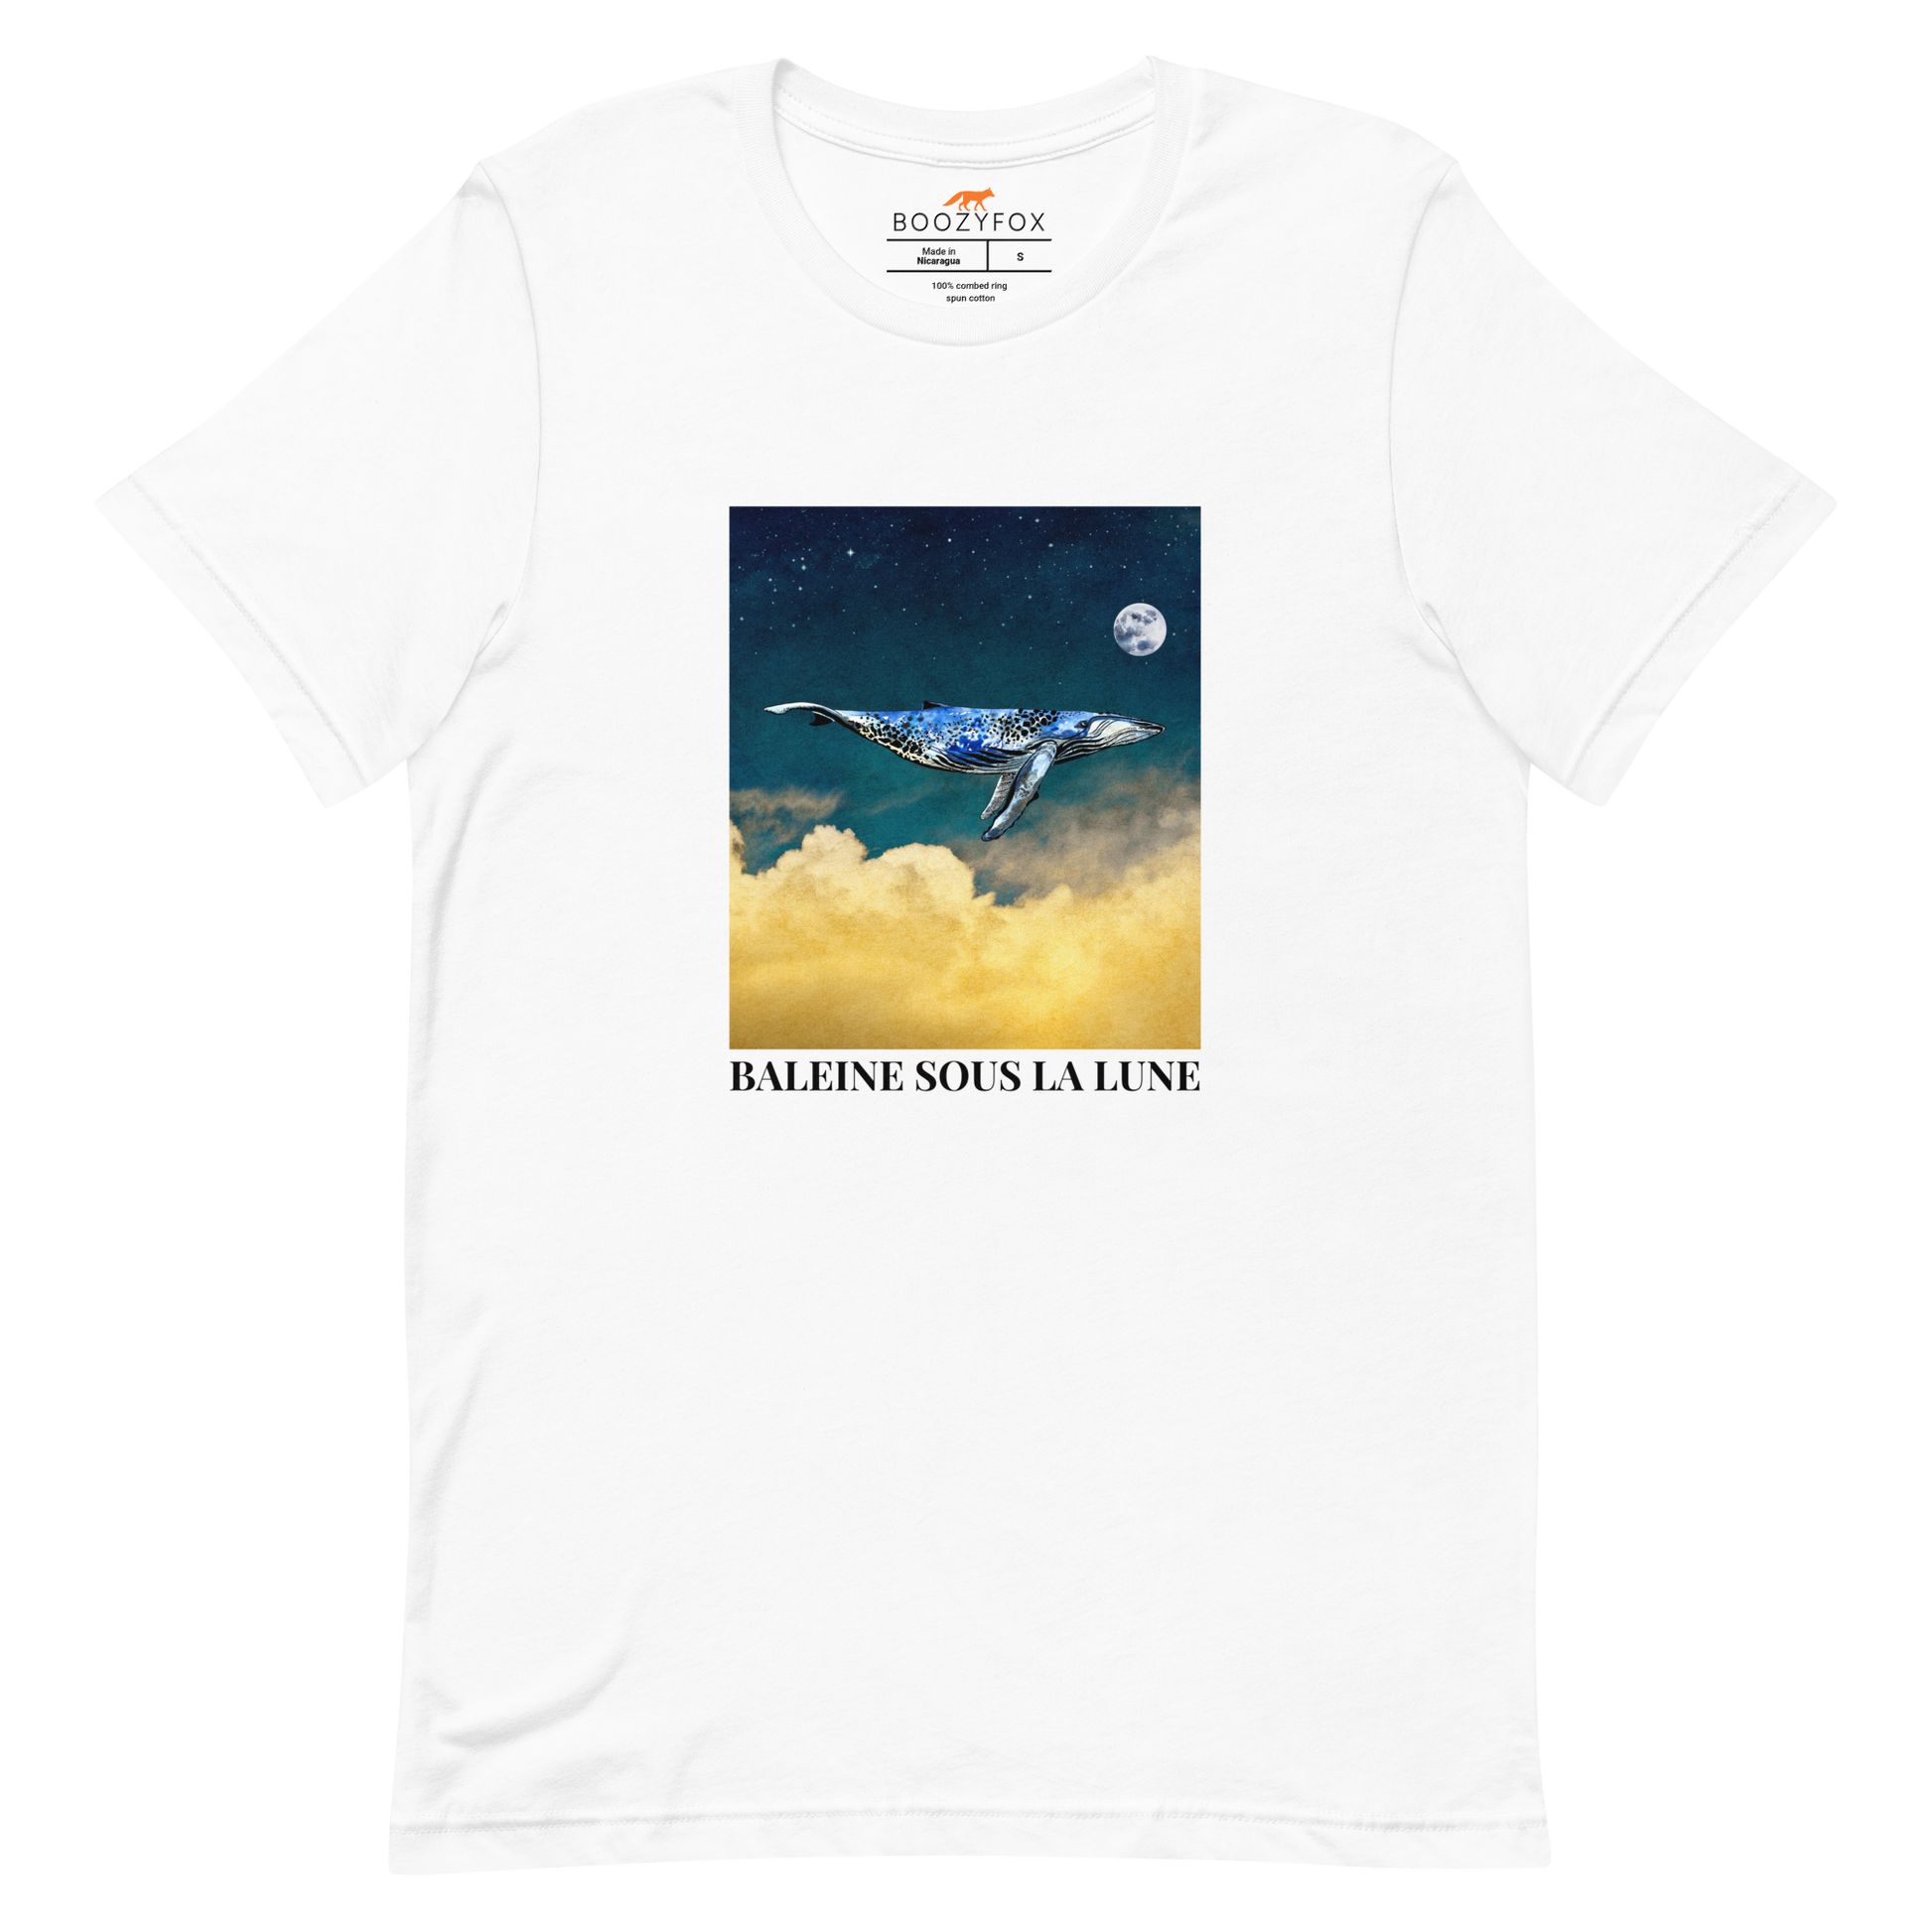 White Premium Whale T-Shirt featuring a majestic Whale Under The Moon graphic on the chest - Cool Graphic Whale Tees - Boozy Fox